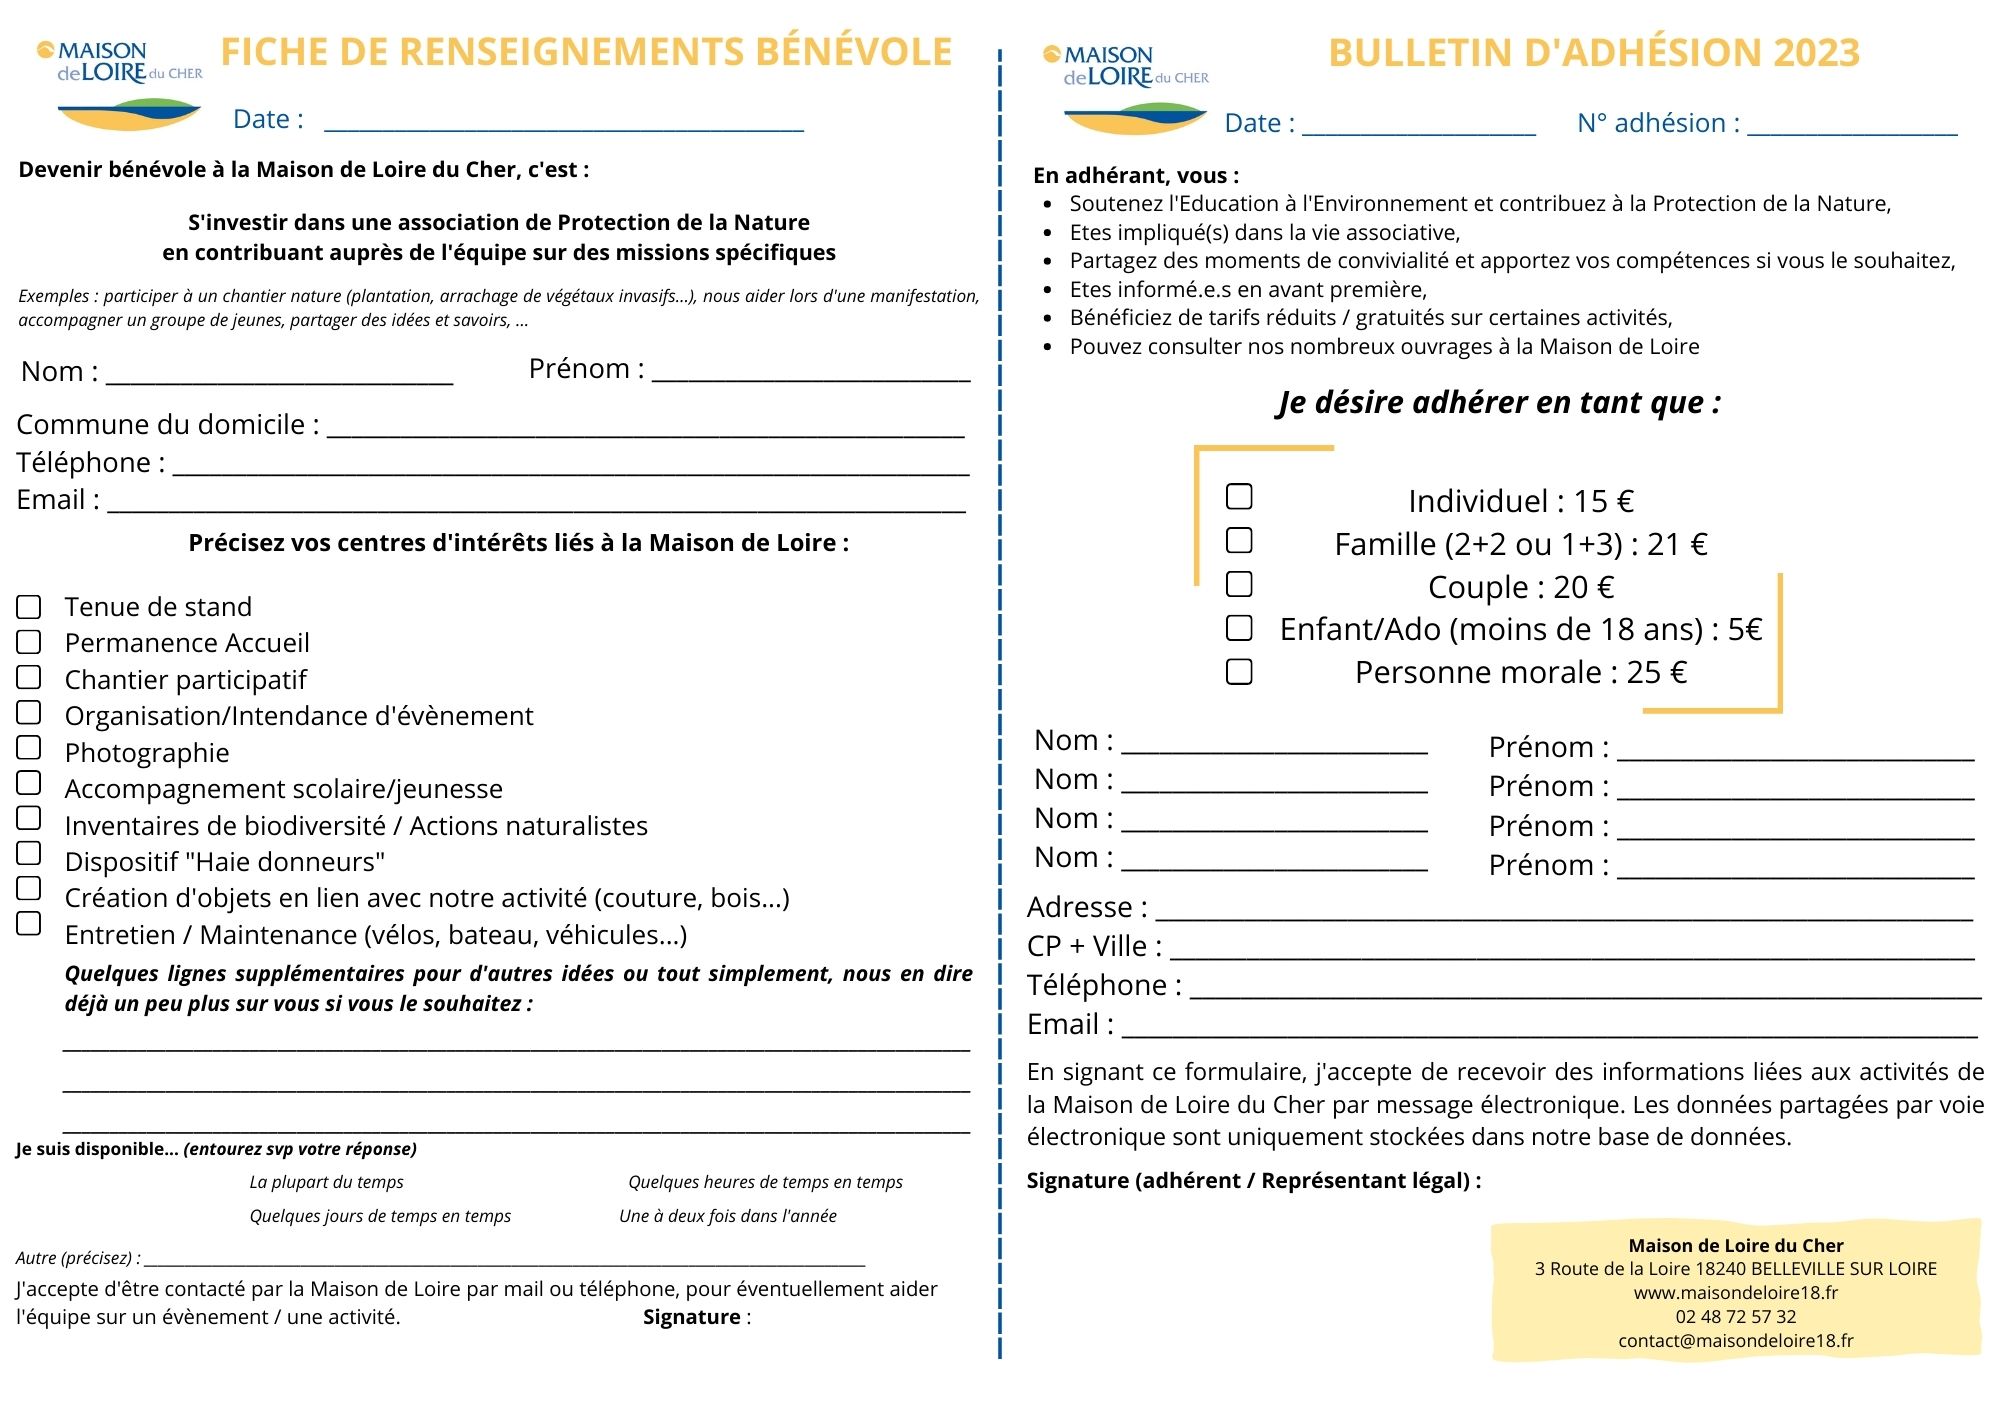 You are currently viewing MDL18 – bulletin d’adhésion/fiche renseignement bénévole